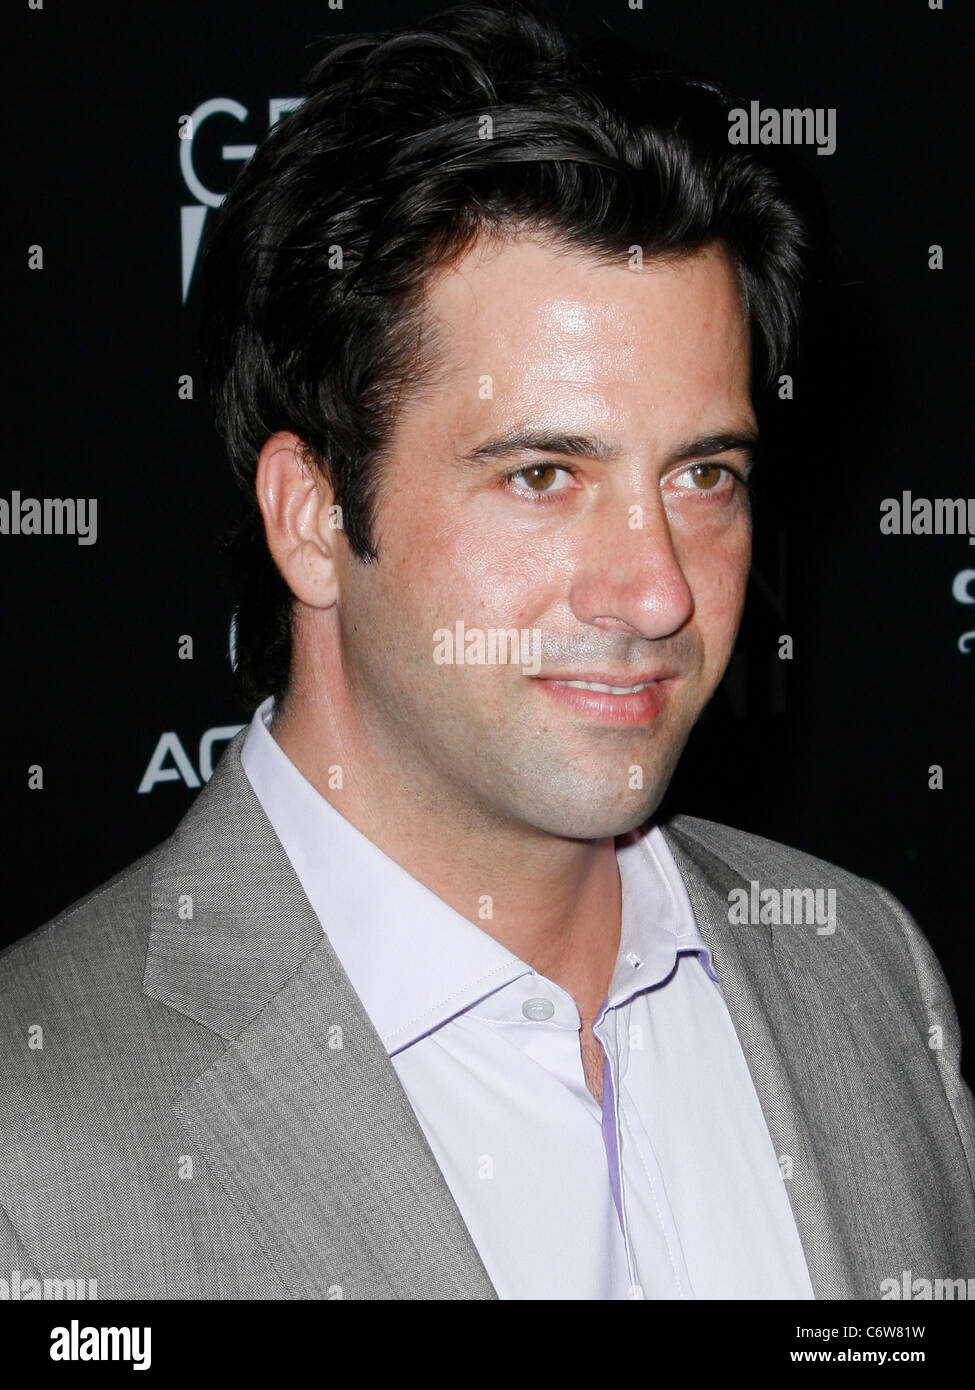 Troy Garity Los Angeles Premiere of 'Mercy' held at the Egyptian Theatre Hollywood, California - 03.05.10 Stock Photo